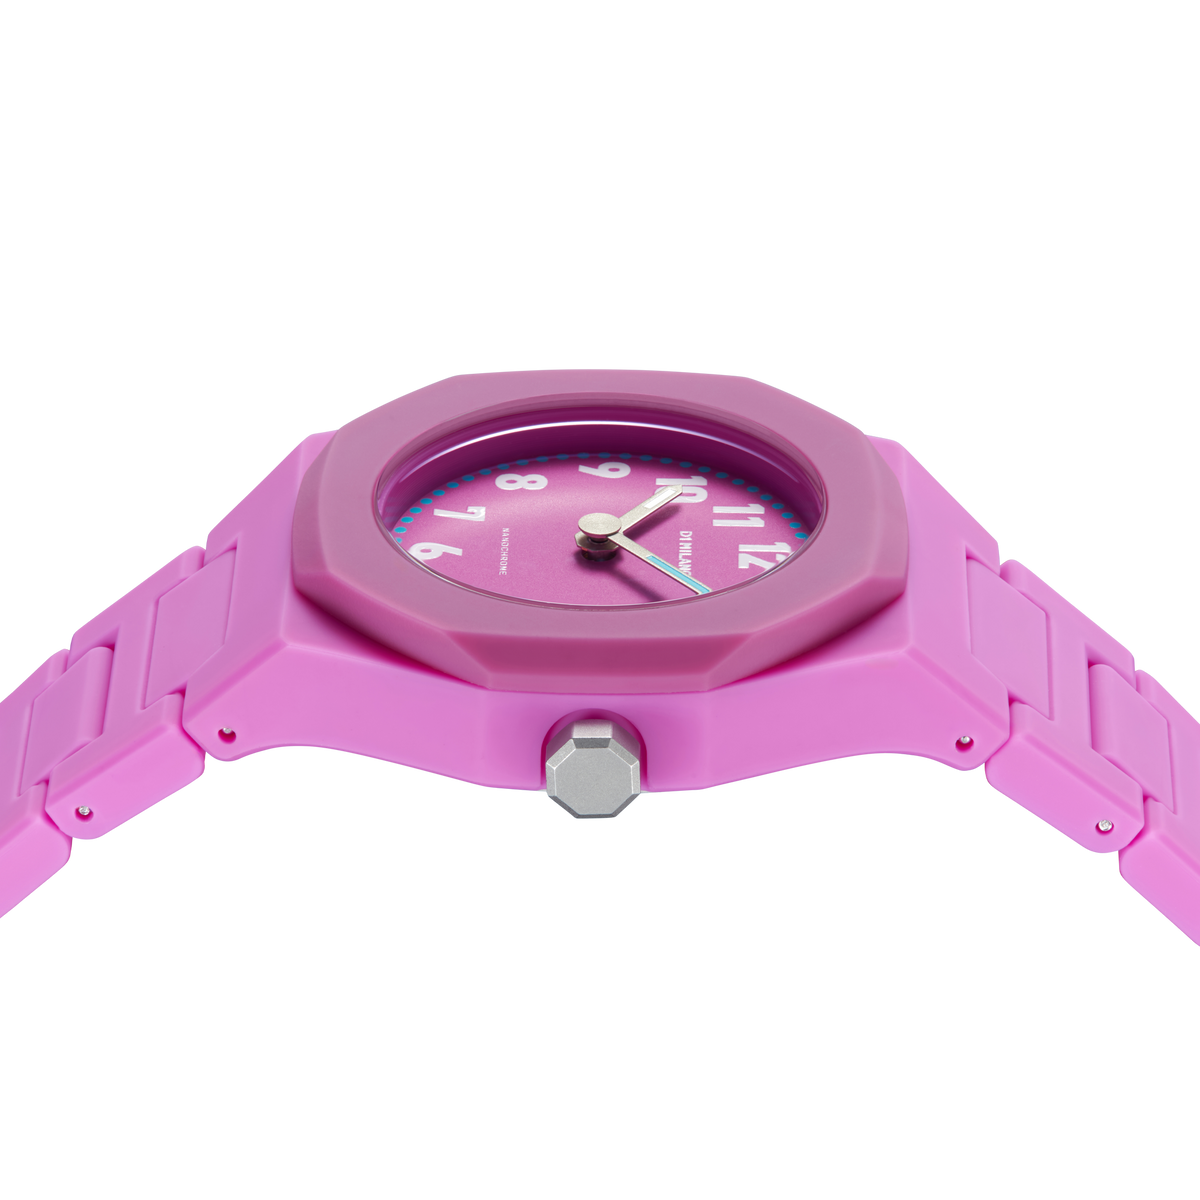 Shop D1 Milano Watch Young 32 Mm In Pink/white